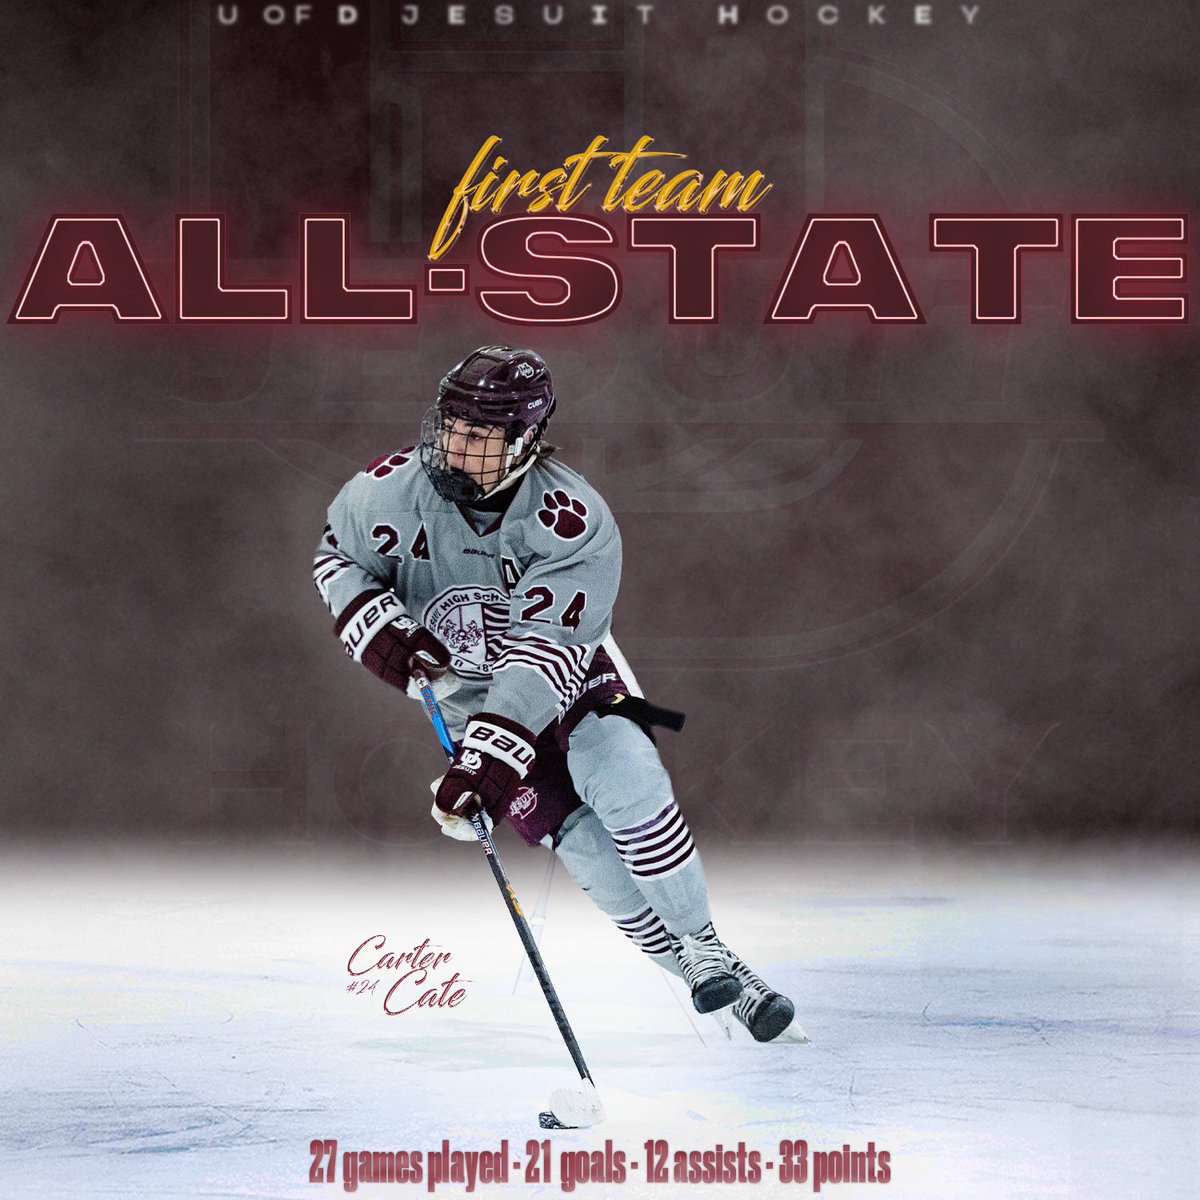 Congratulations to @UDJHockey Senior Forward Carter Cate on being selected 1at Team All State! #AMDG